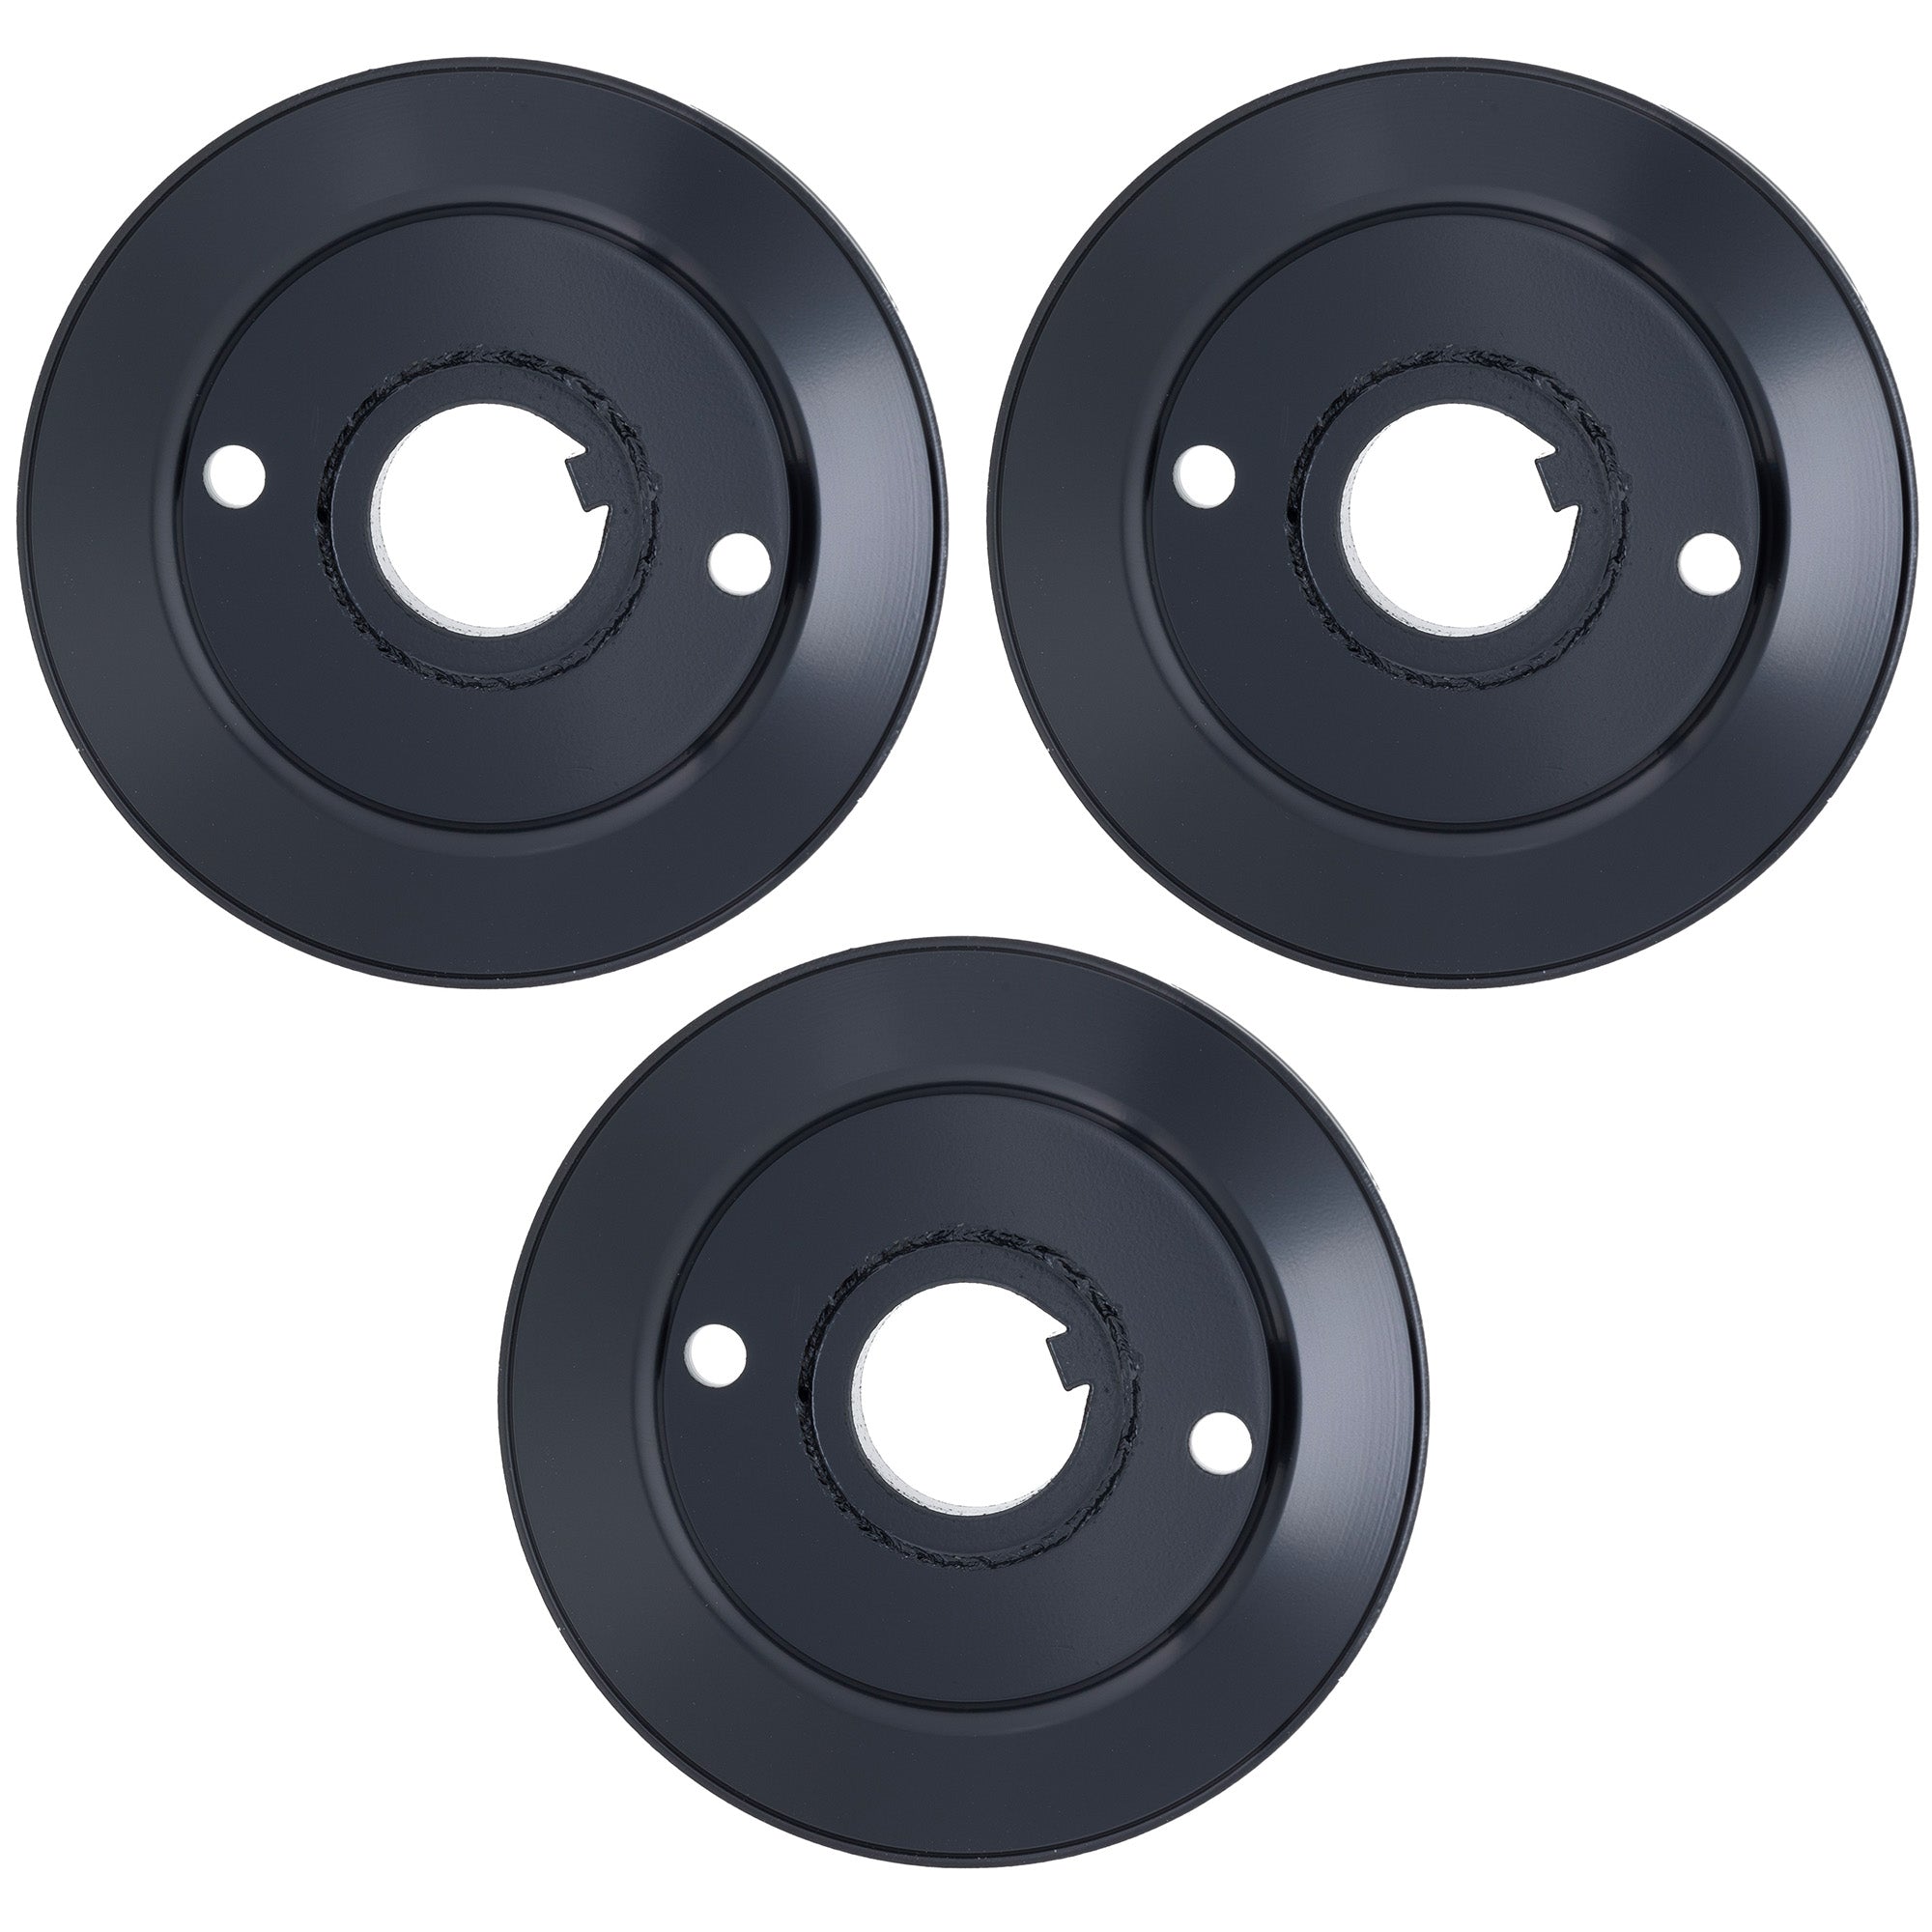 Blade Spindle Belt Pulley Deck Kit For Ariens Gravely MK1010082